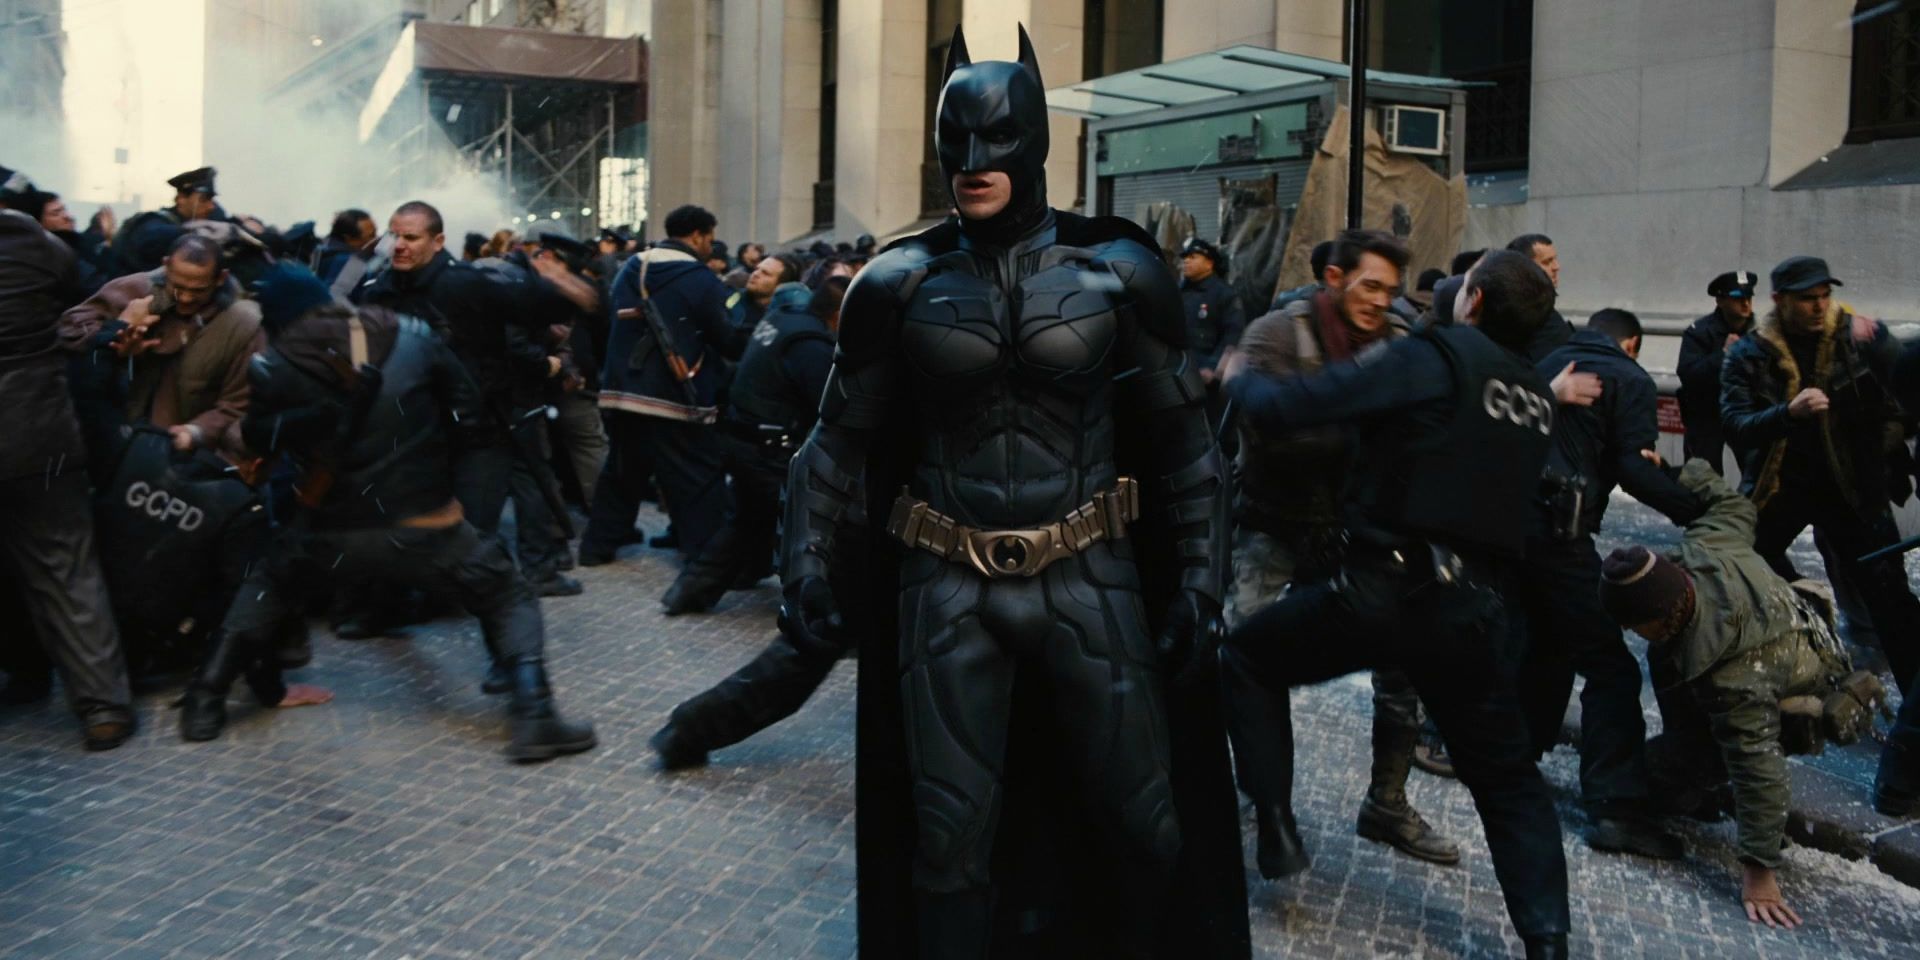 Every LiveAction Movie Featuring Batman (Ranked By Metacritic)